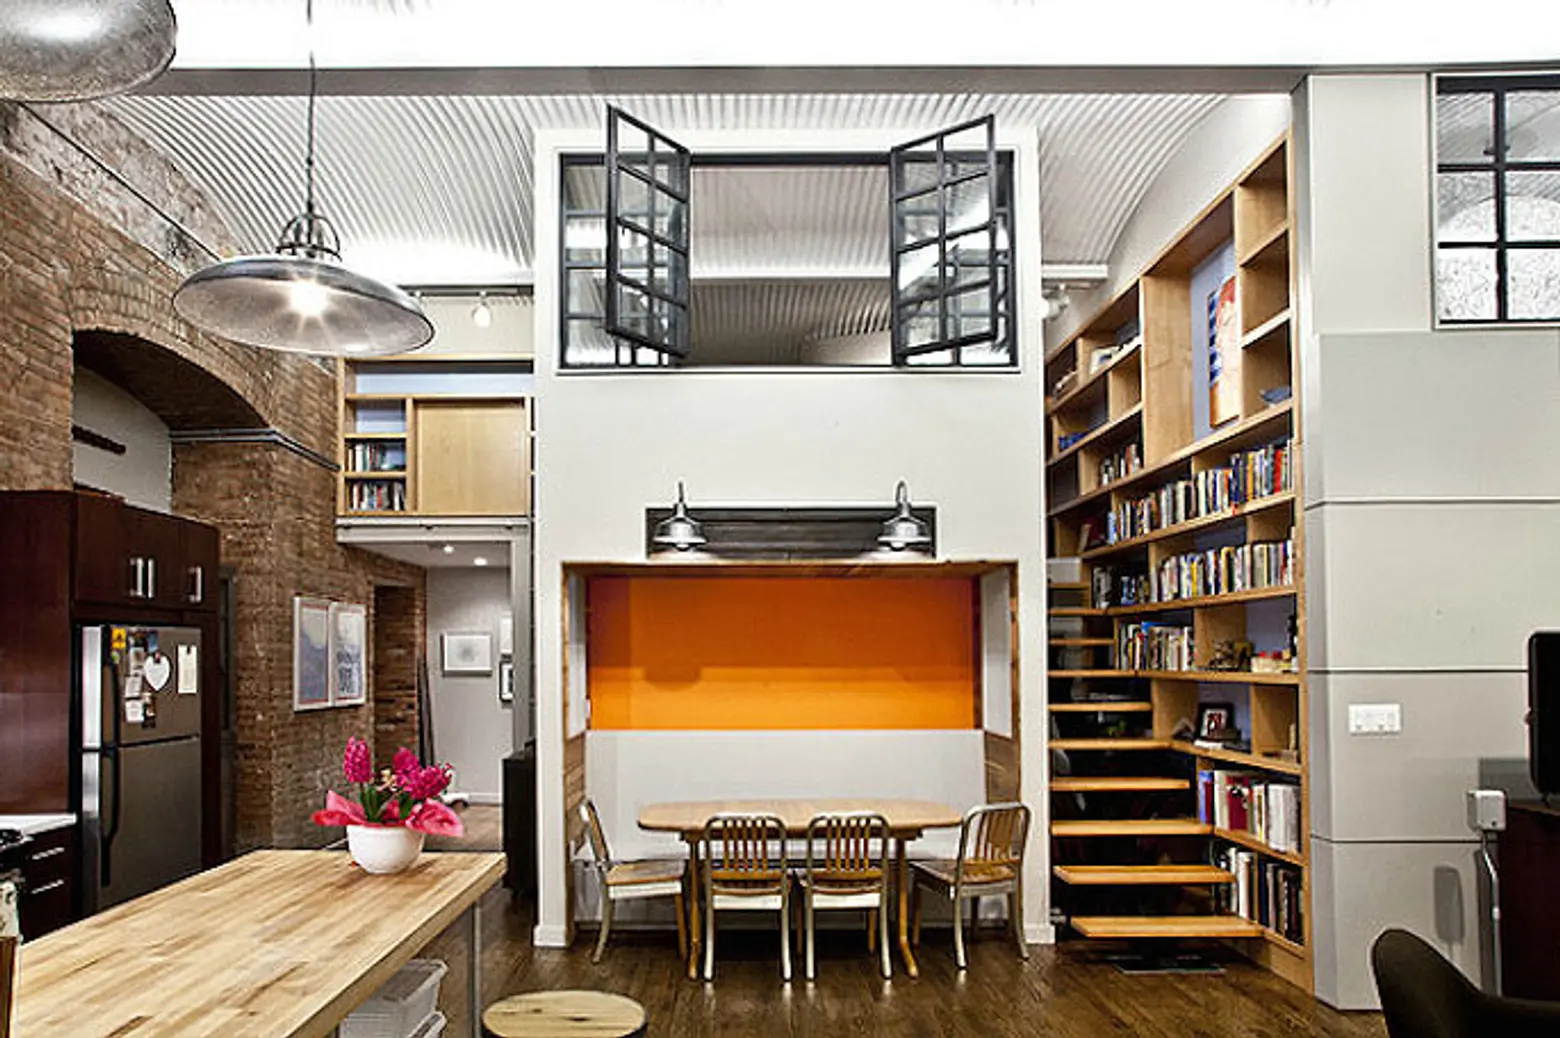 Wooden Accents and Pops of Color Add a Dash of Coziness to This Industrial Loft by Design42